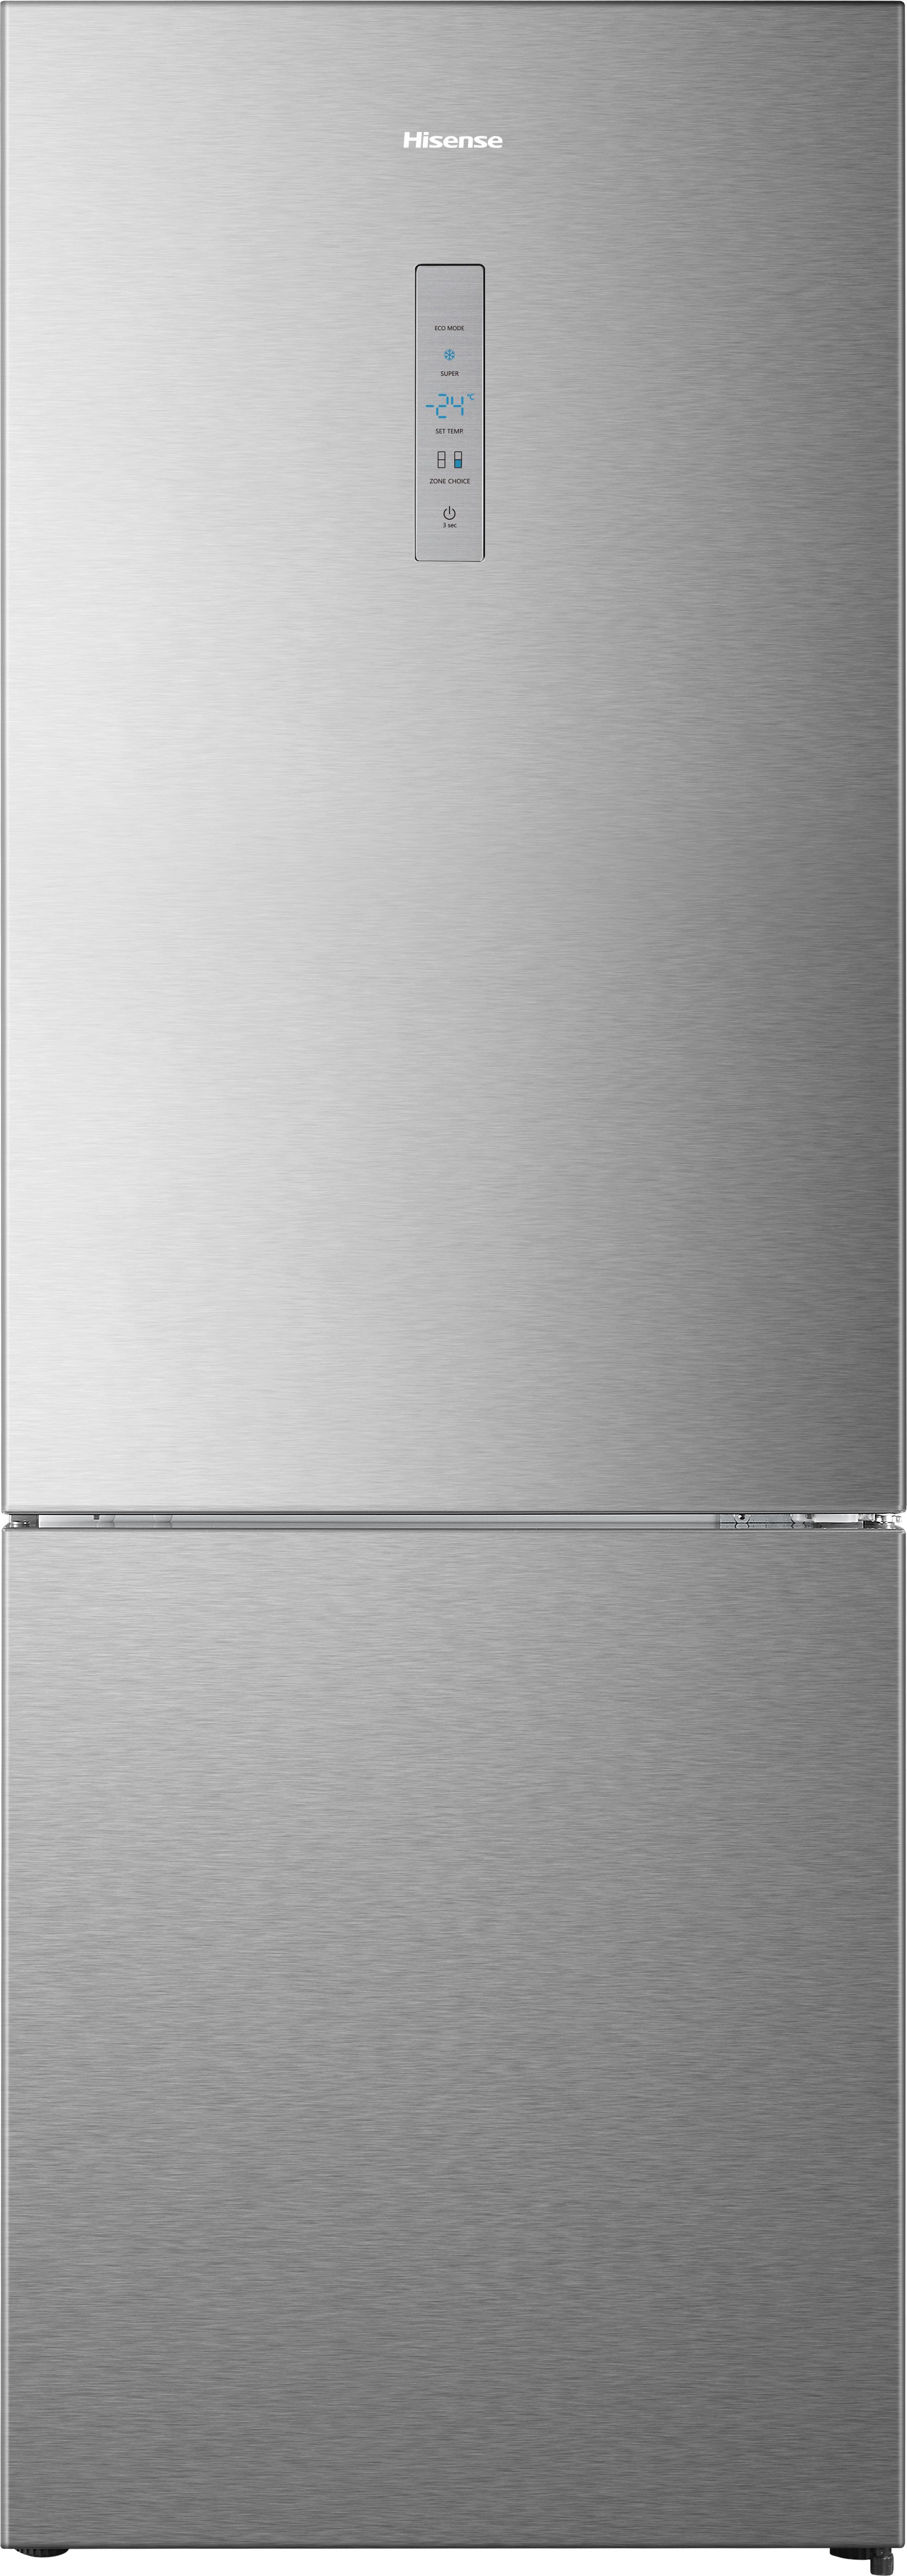 Hisense RB645N4BIE 60/40 Frost Free Fridge Freezer - Stainless Steel - E Rated, Stainless Steel